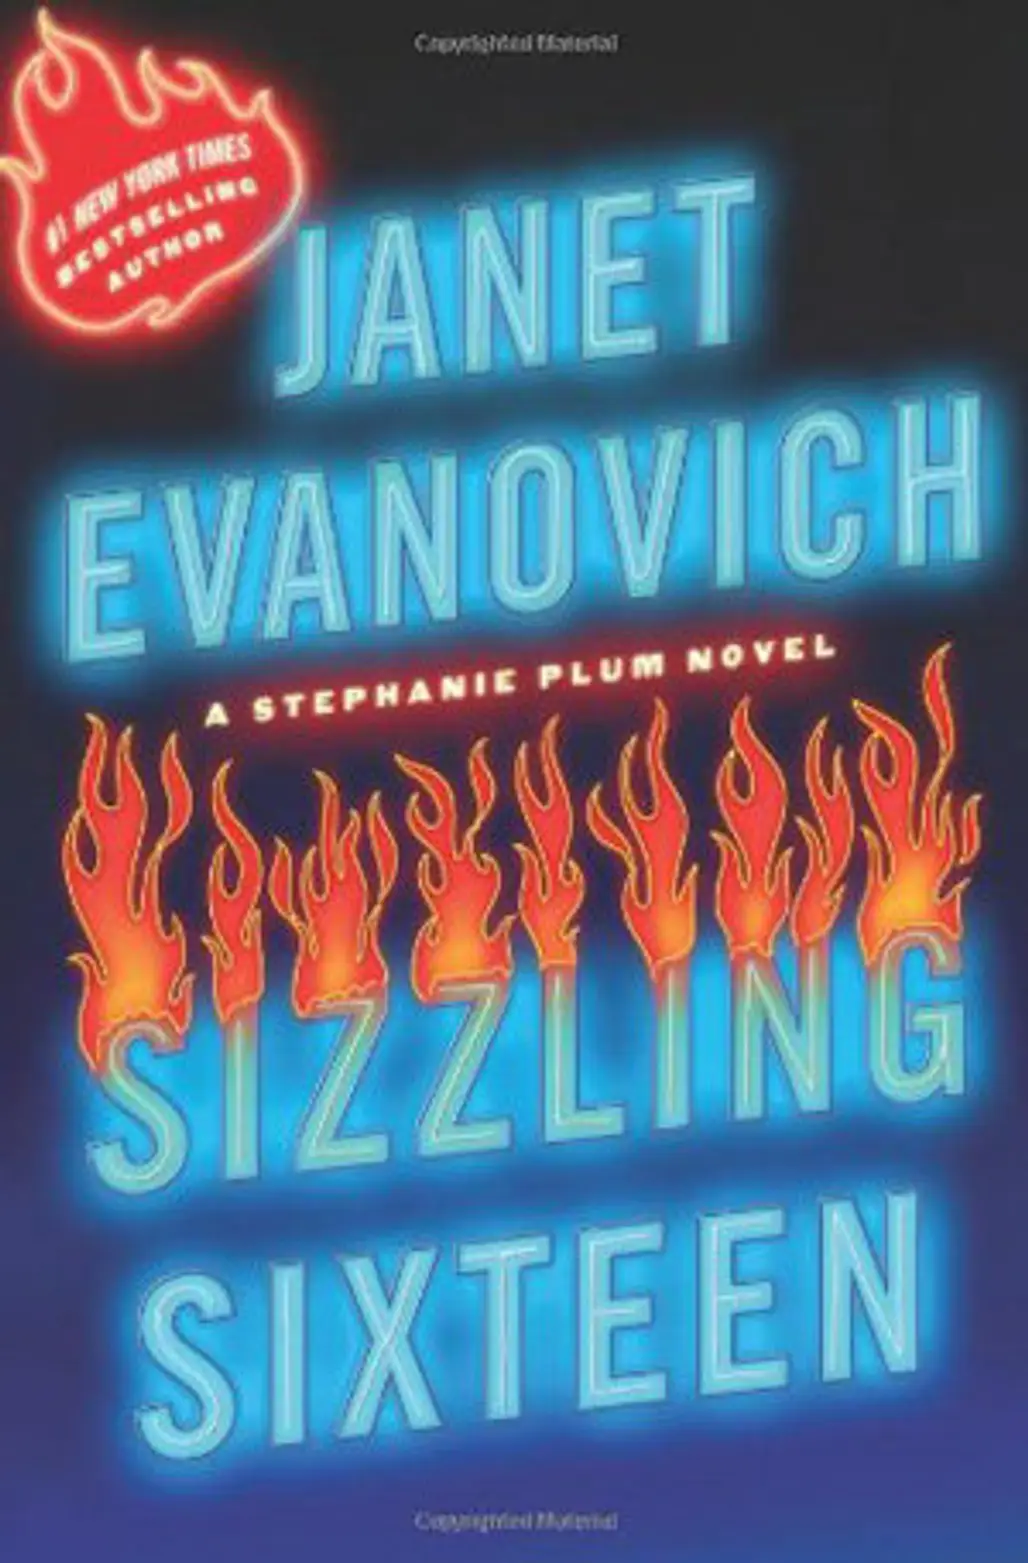 Sizzling Sixteen by Janet Evanovich